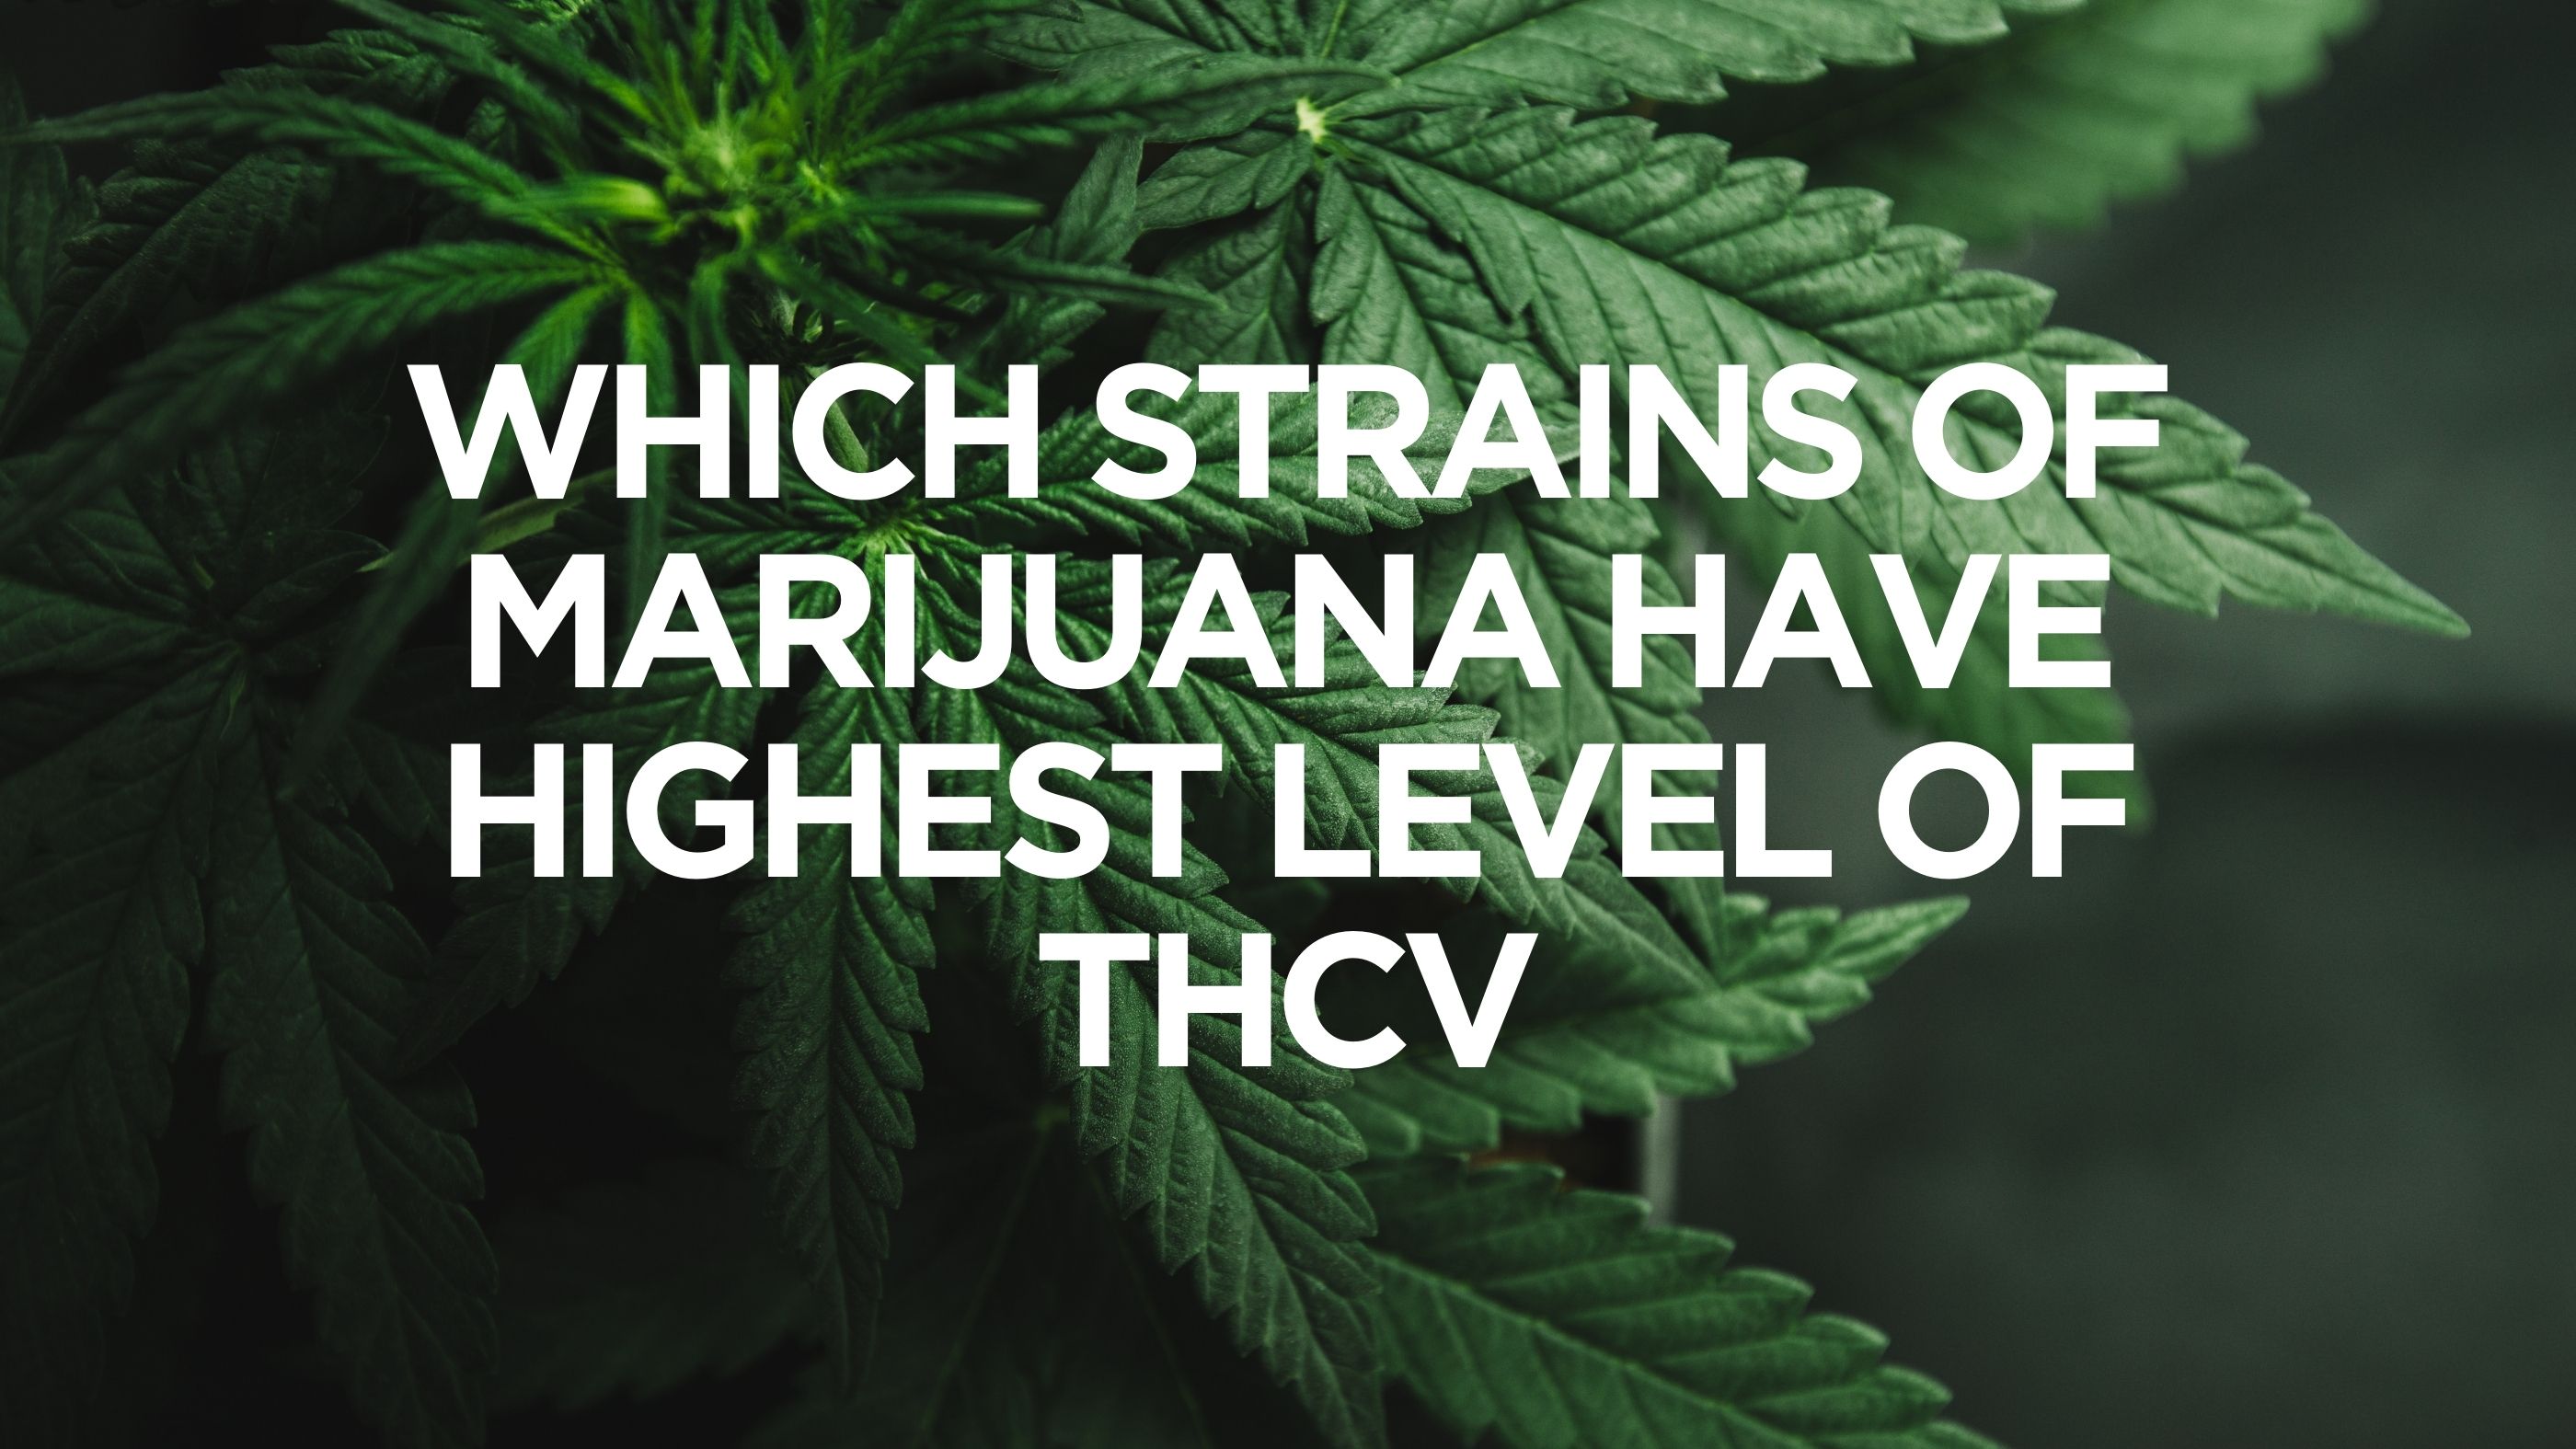 Which Strains of Marijuana Have Highest Level of THCV? | Apotheca